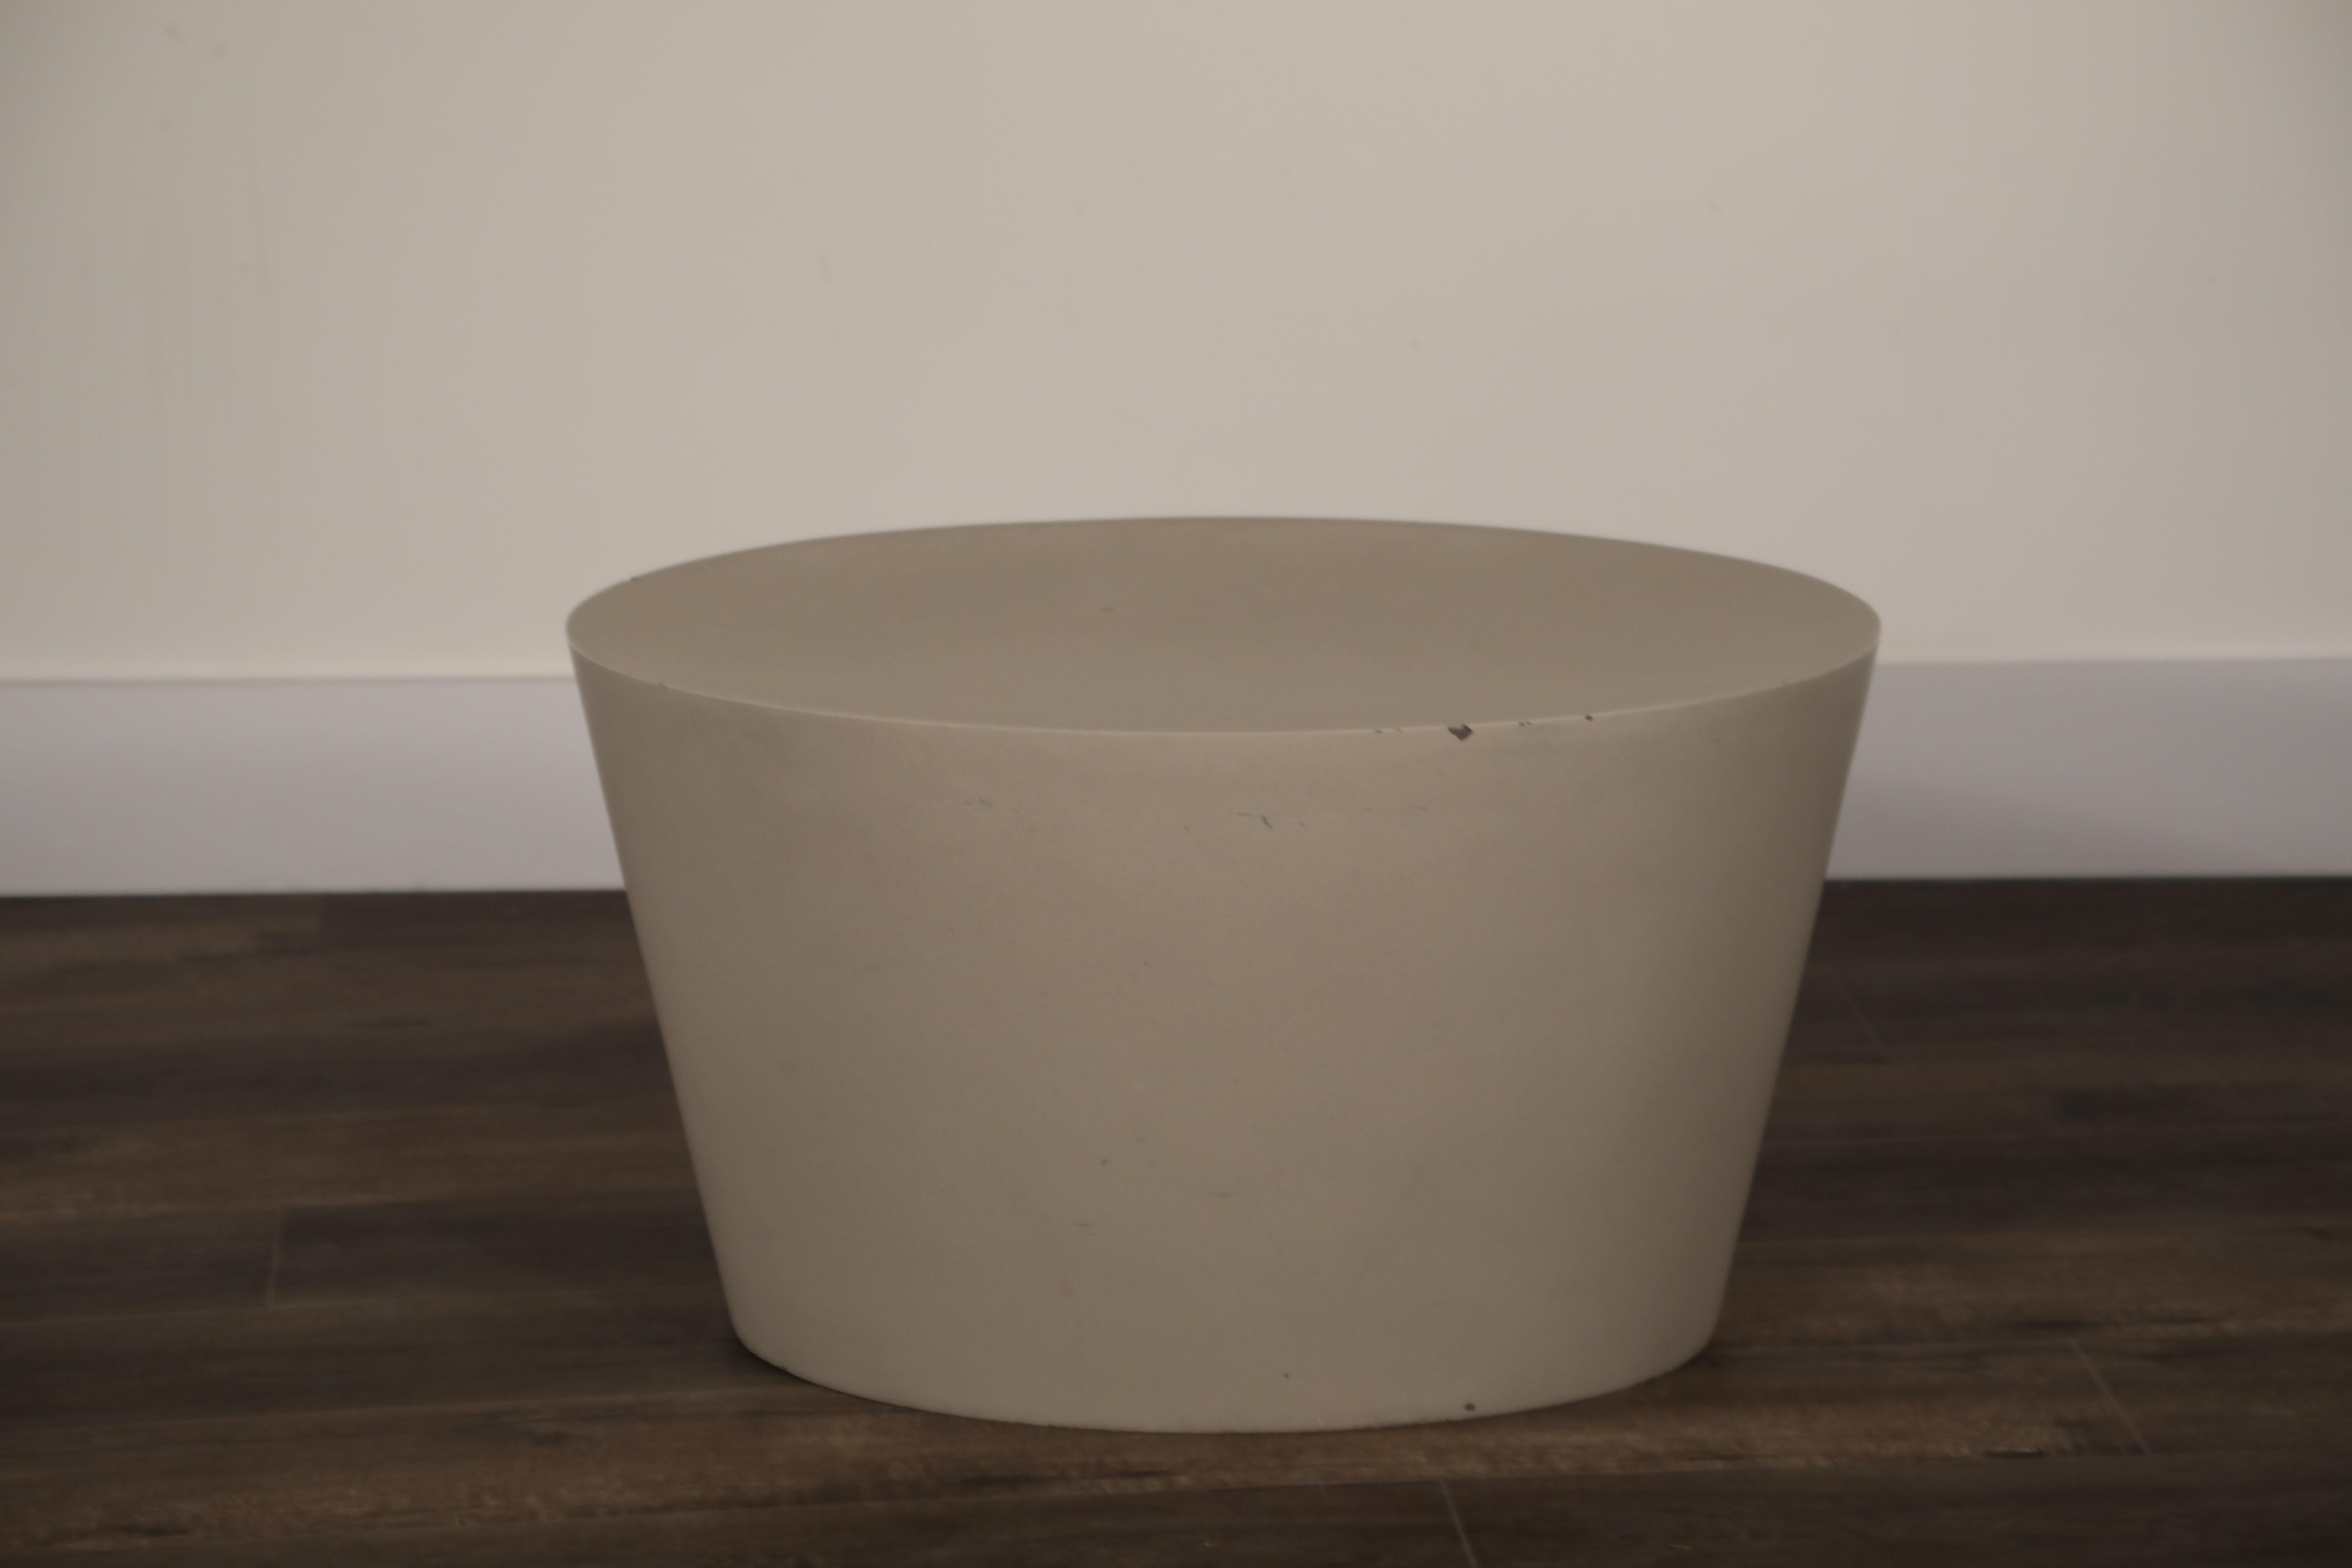 Maya Lin 1st-Generation Concrete Stool for Knoll Studio, Signed and Stamped 1998 7